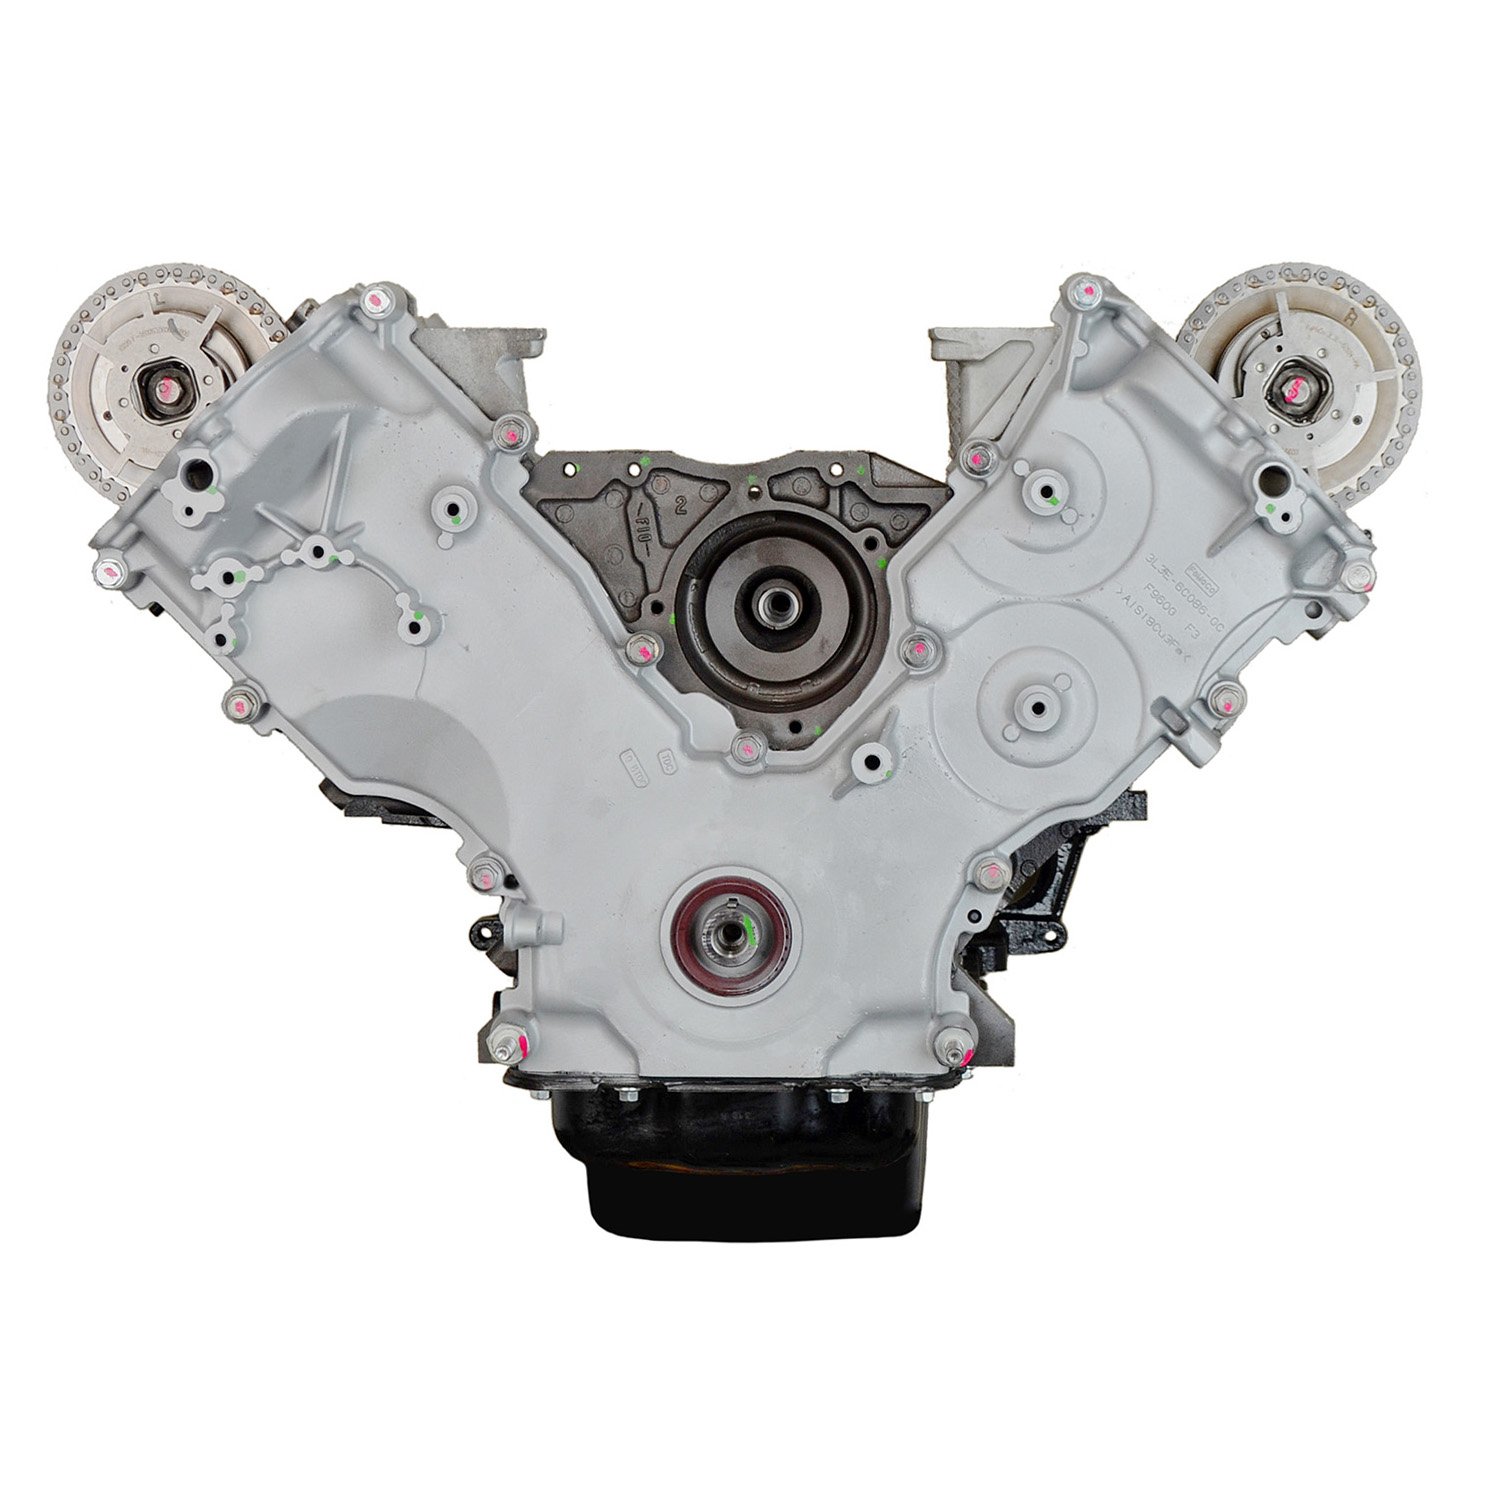 DFDV Remanufactured Crate Engine for 2004-2008 Ford F-Series Truck & Expedition with 5.4L V8